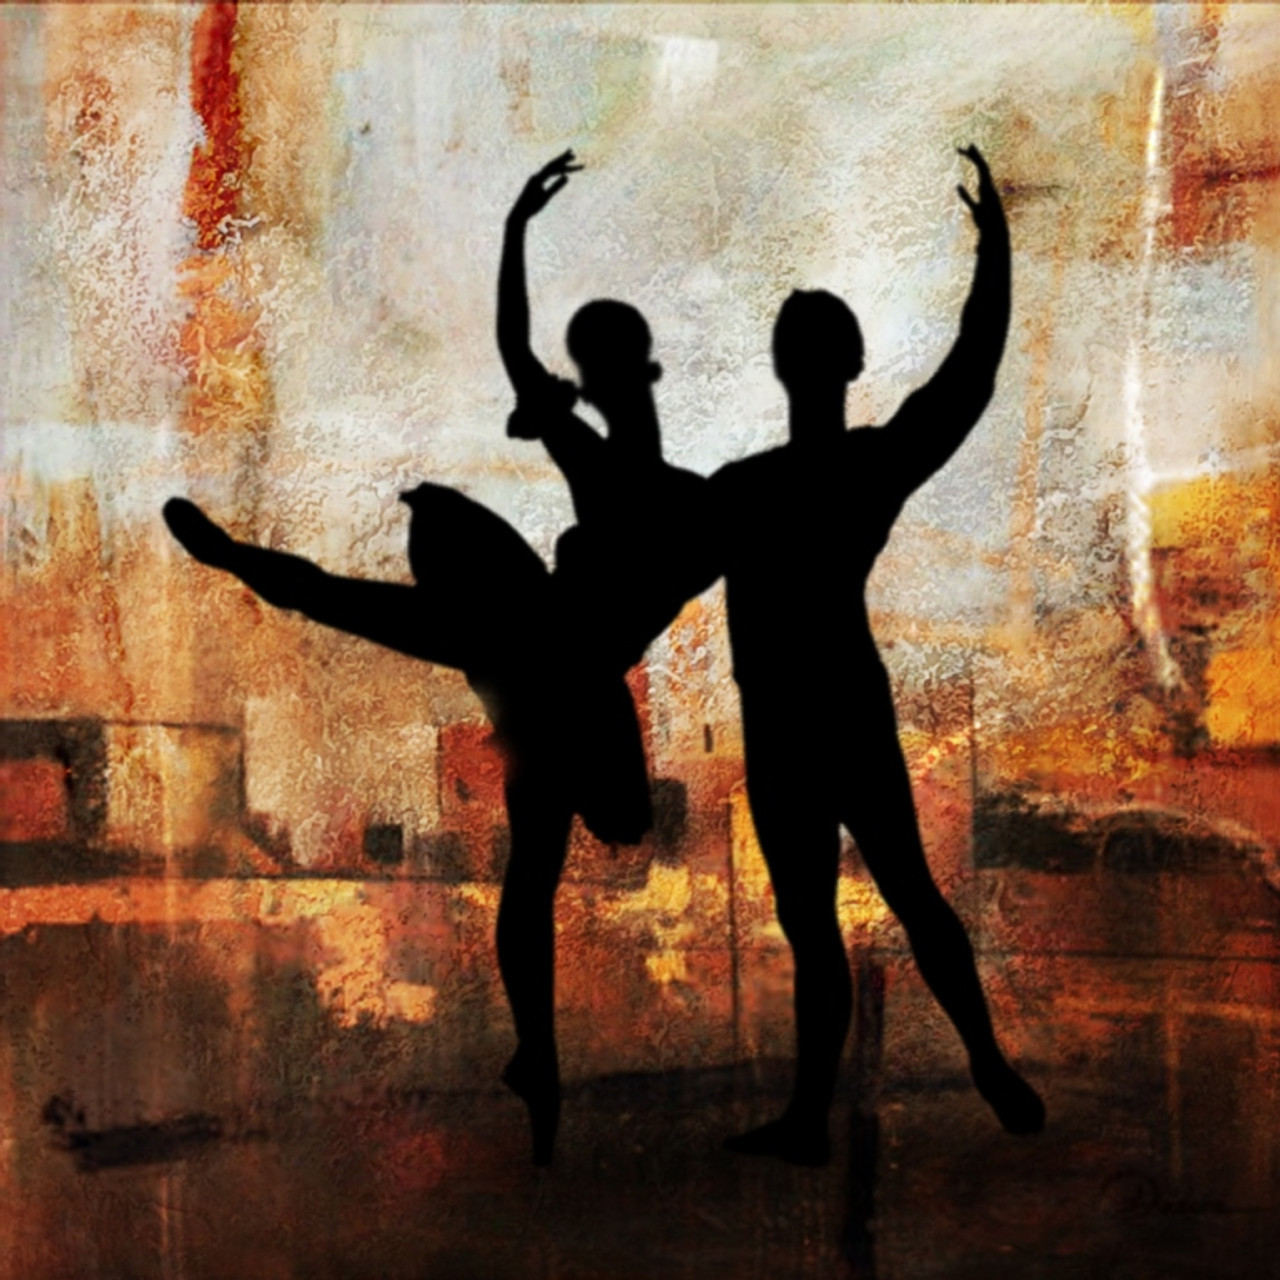 Buy A Ballet Move 1 by Community Artists Group@ Rs. 5490. Code ...